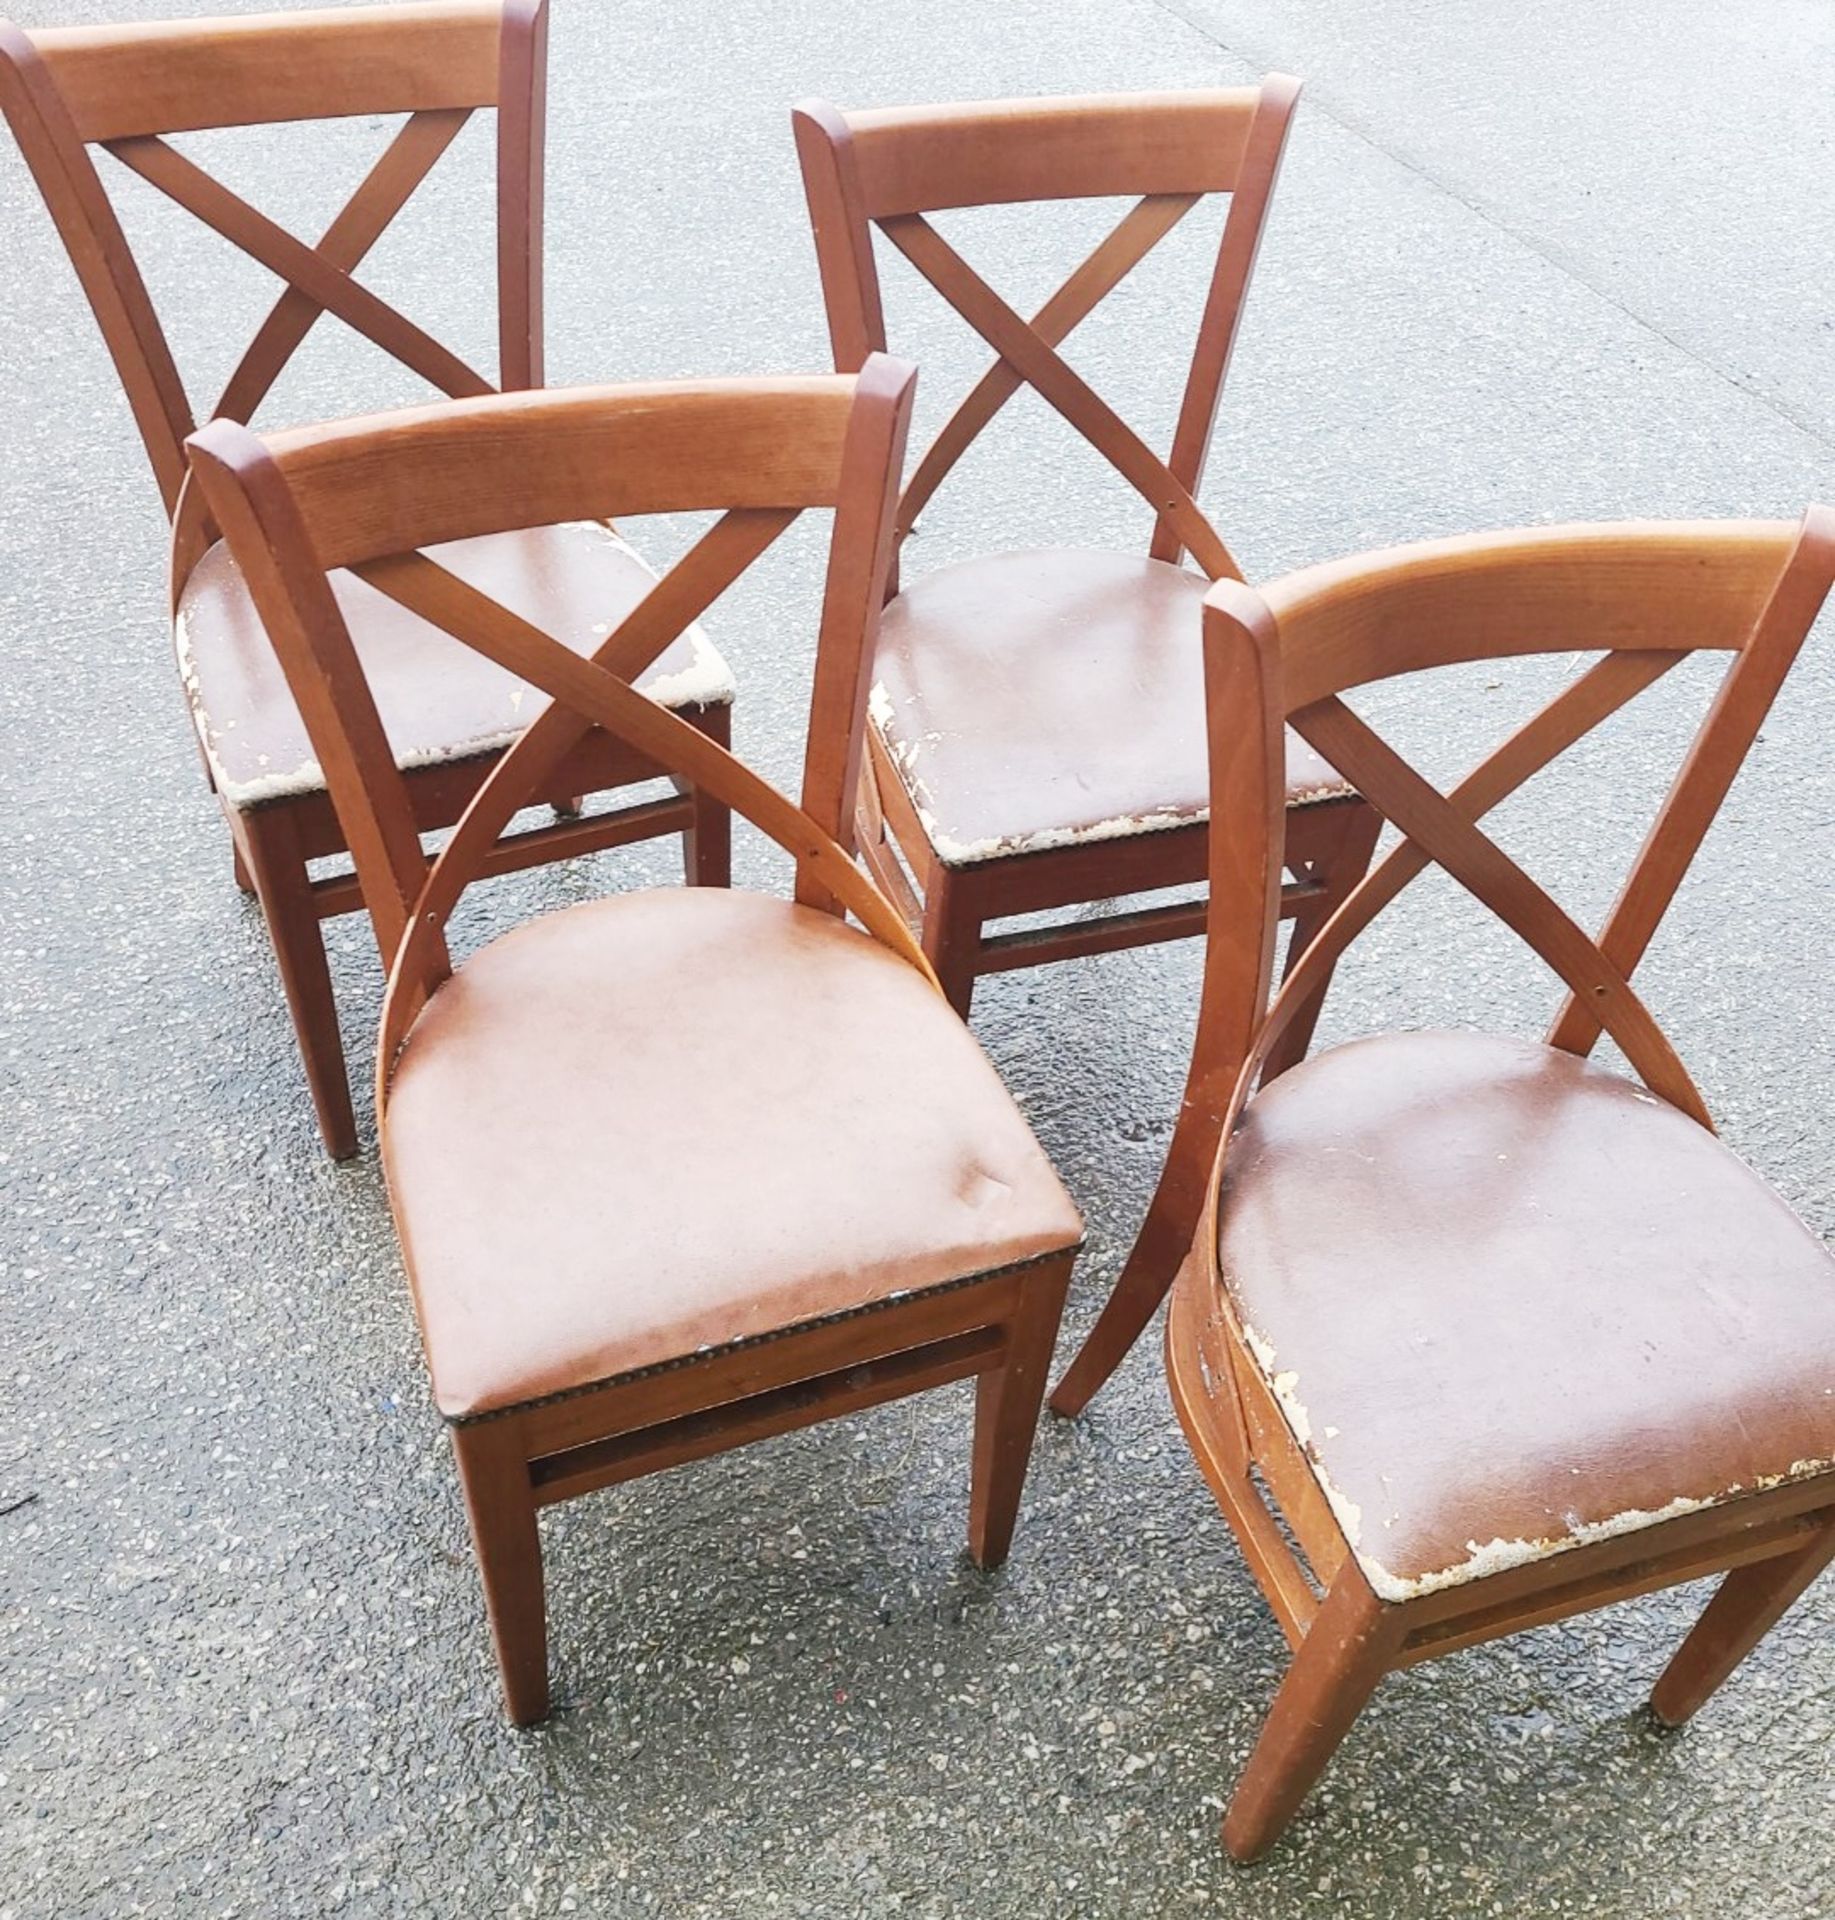 Set Of 4 x 'Leopold' Style Bentwood Side Chair In Walnut Stain & Faux Brown Leather Seat Cushion